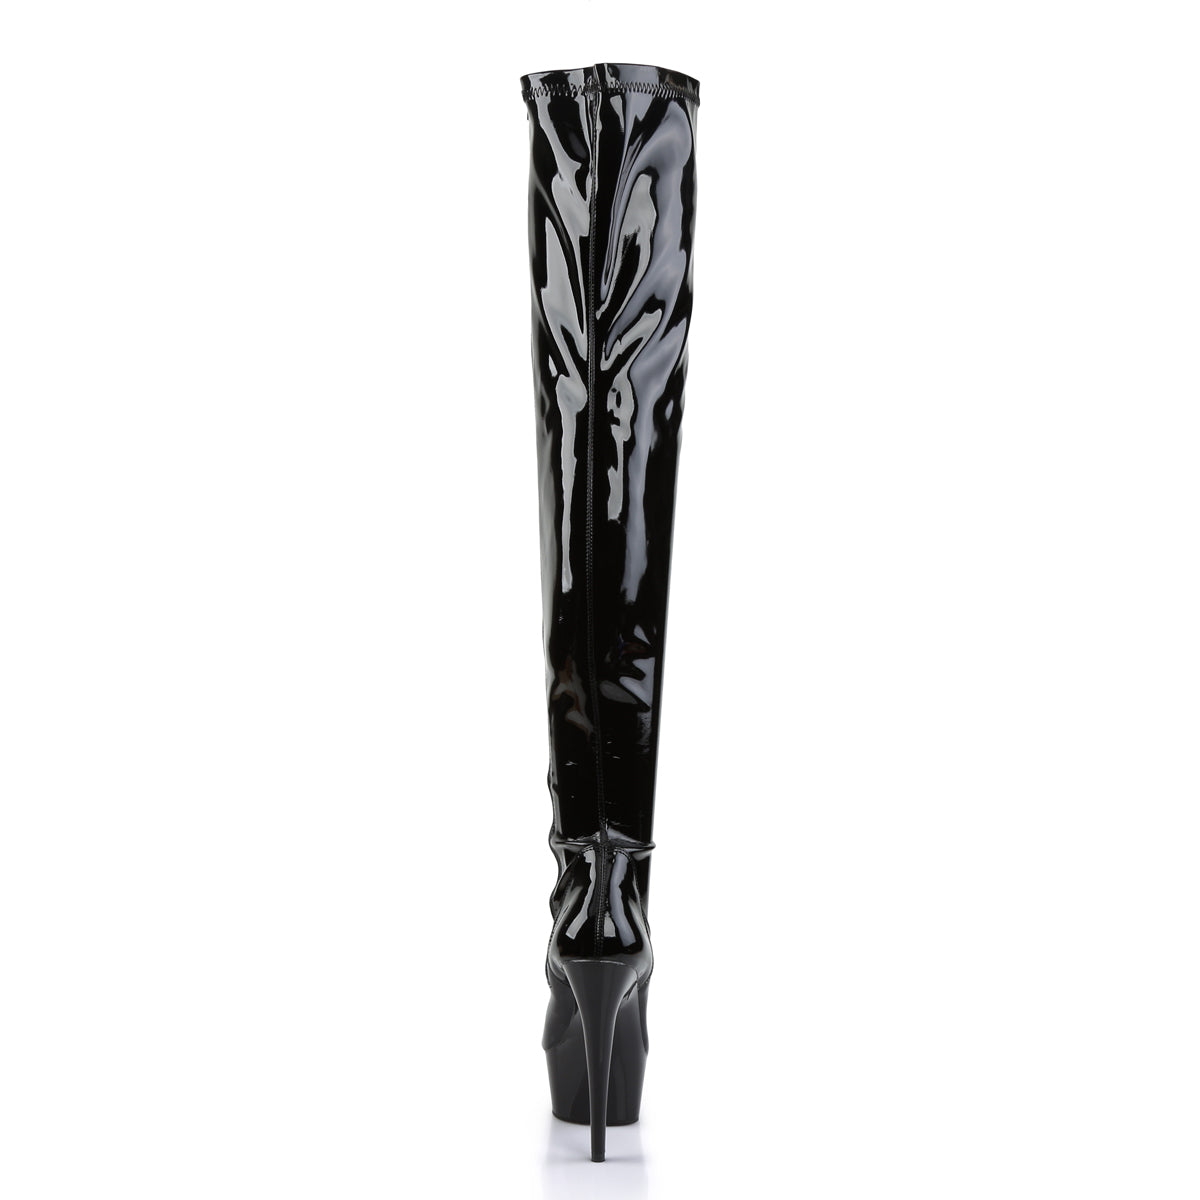 DELIGHT-3000 6" Heel Black Stretch Patent Pole Dancer Boots-Pleaser- Sexy Shoes Fetish Footwear